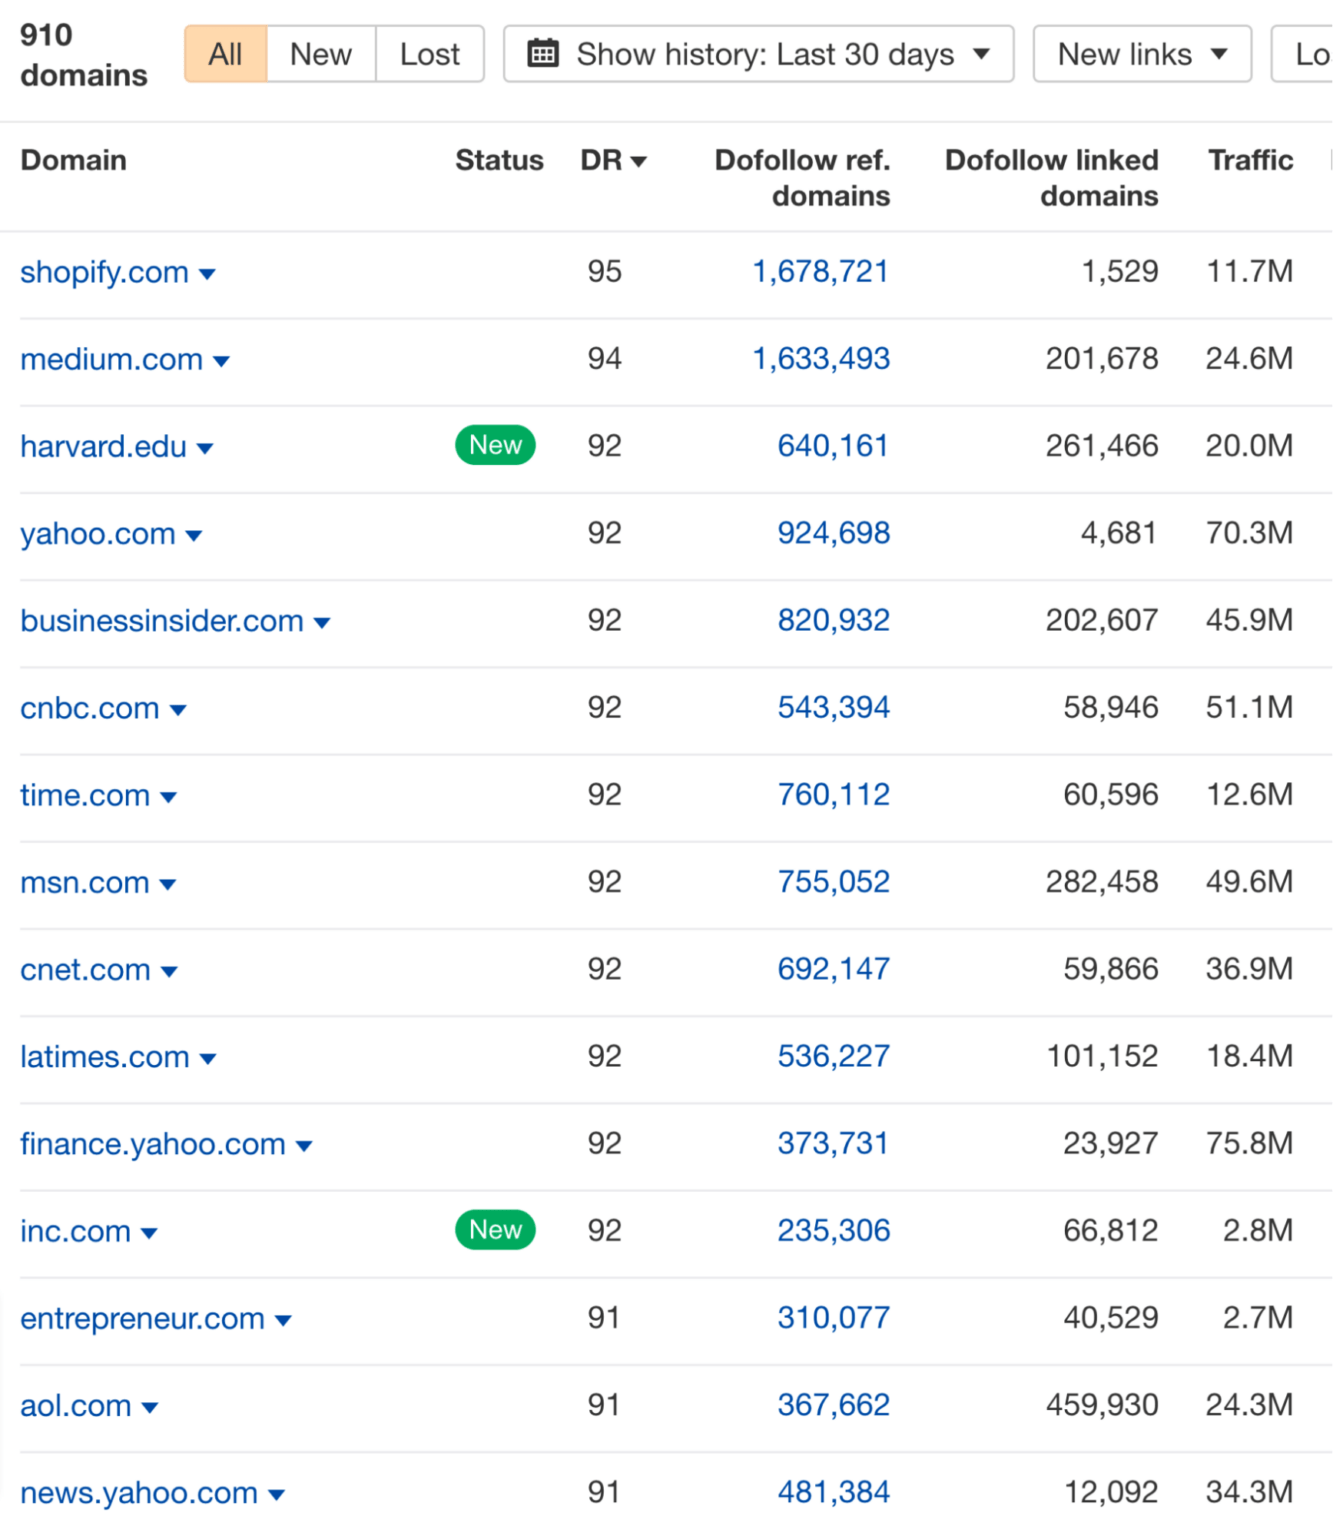 Referring domains report showing domains with high DR